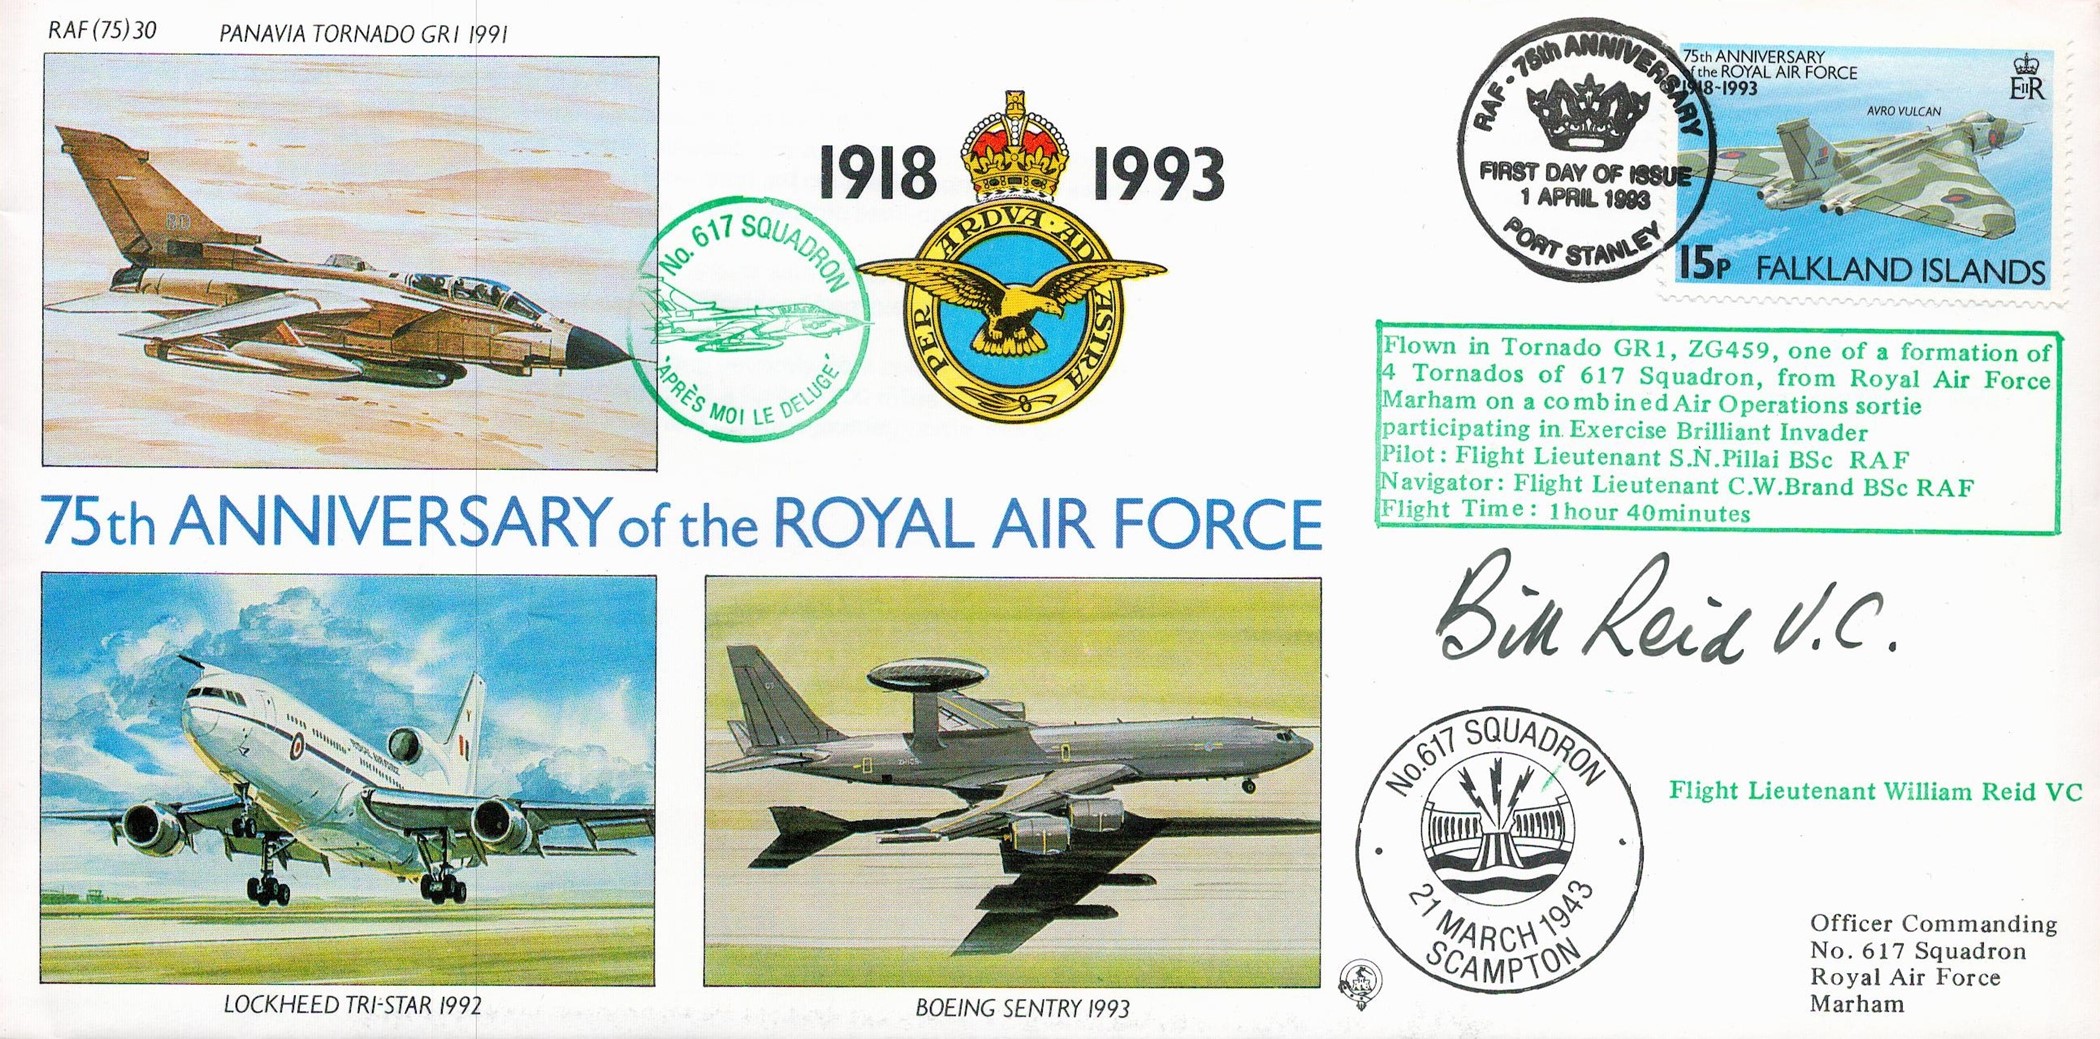 Bill Reid VC Handsigned 75th Anniversary of the Royal Air Force FDC. RAF(75)30. Flown in Tornado